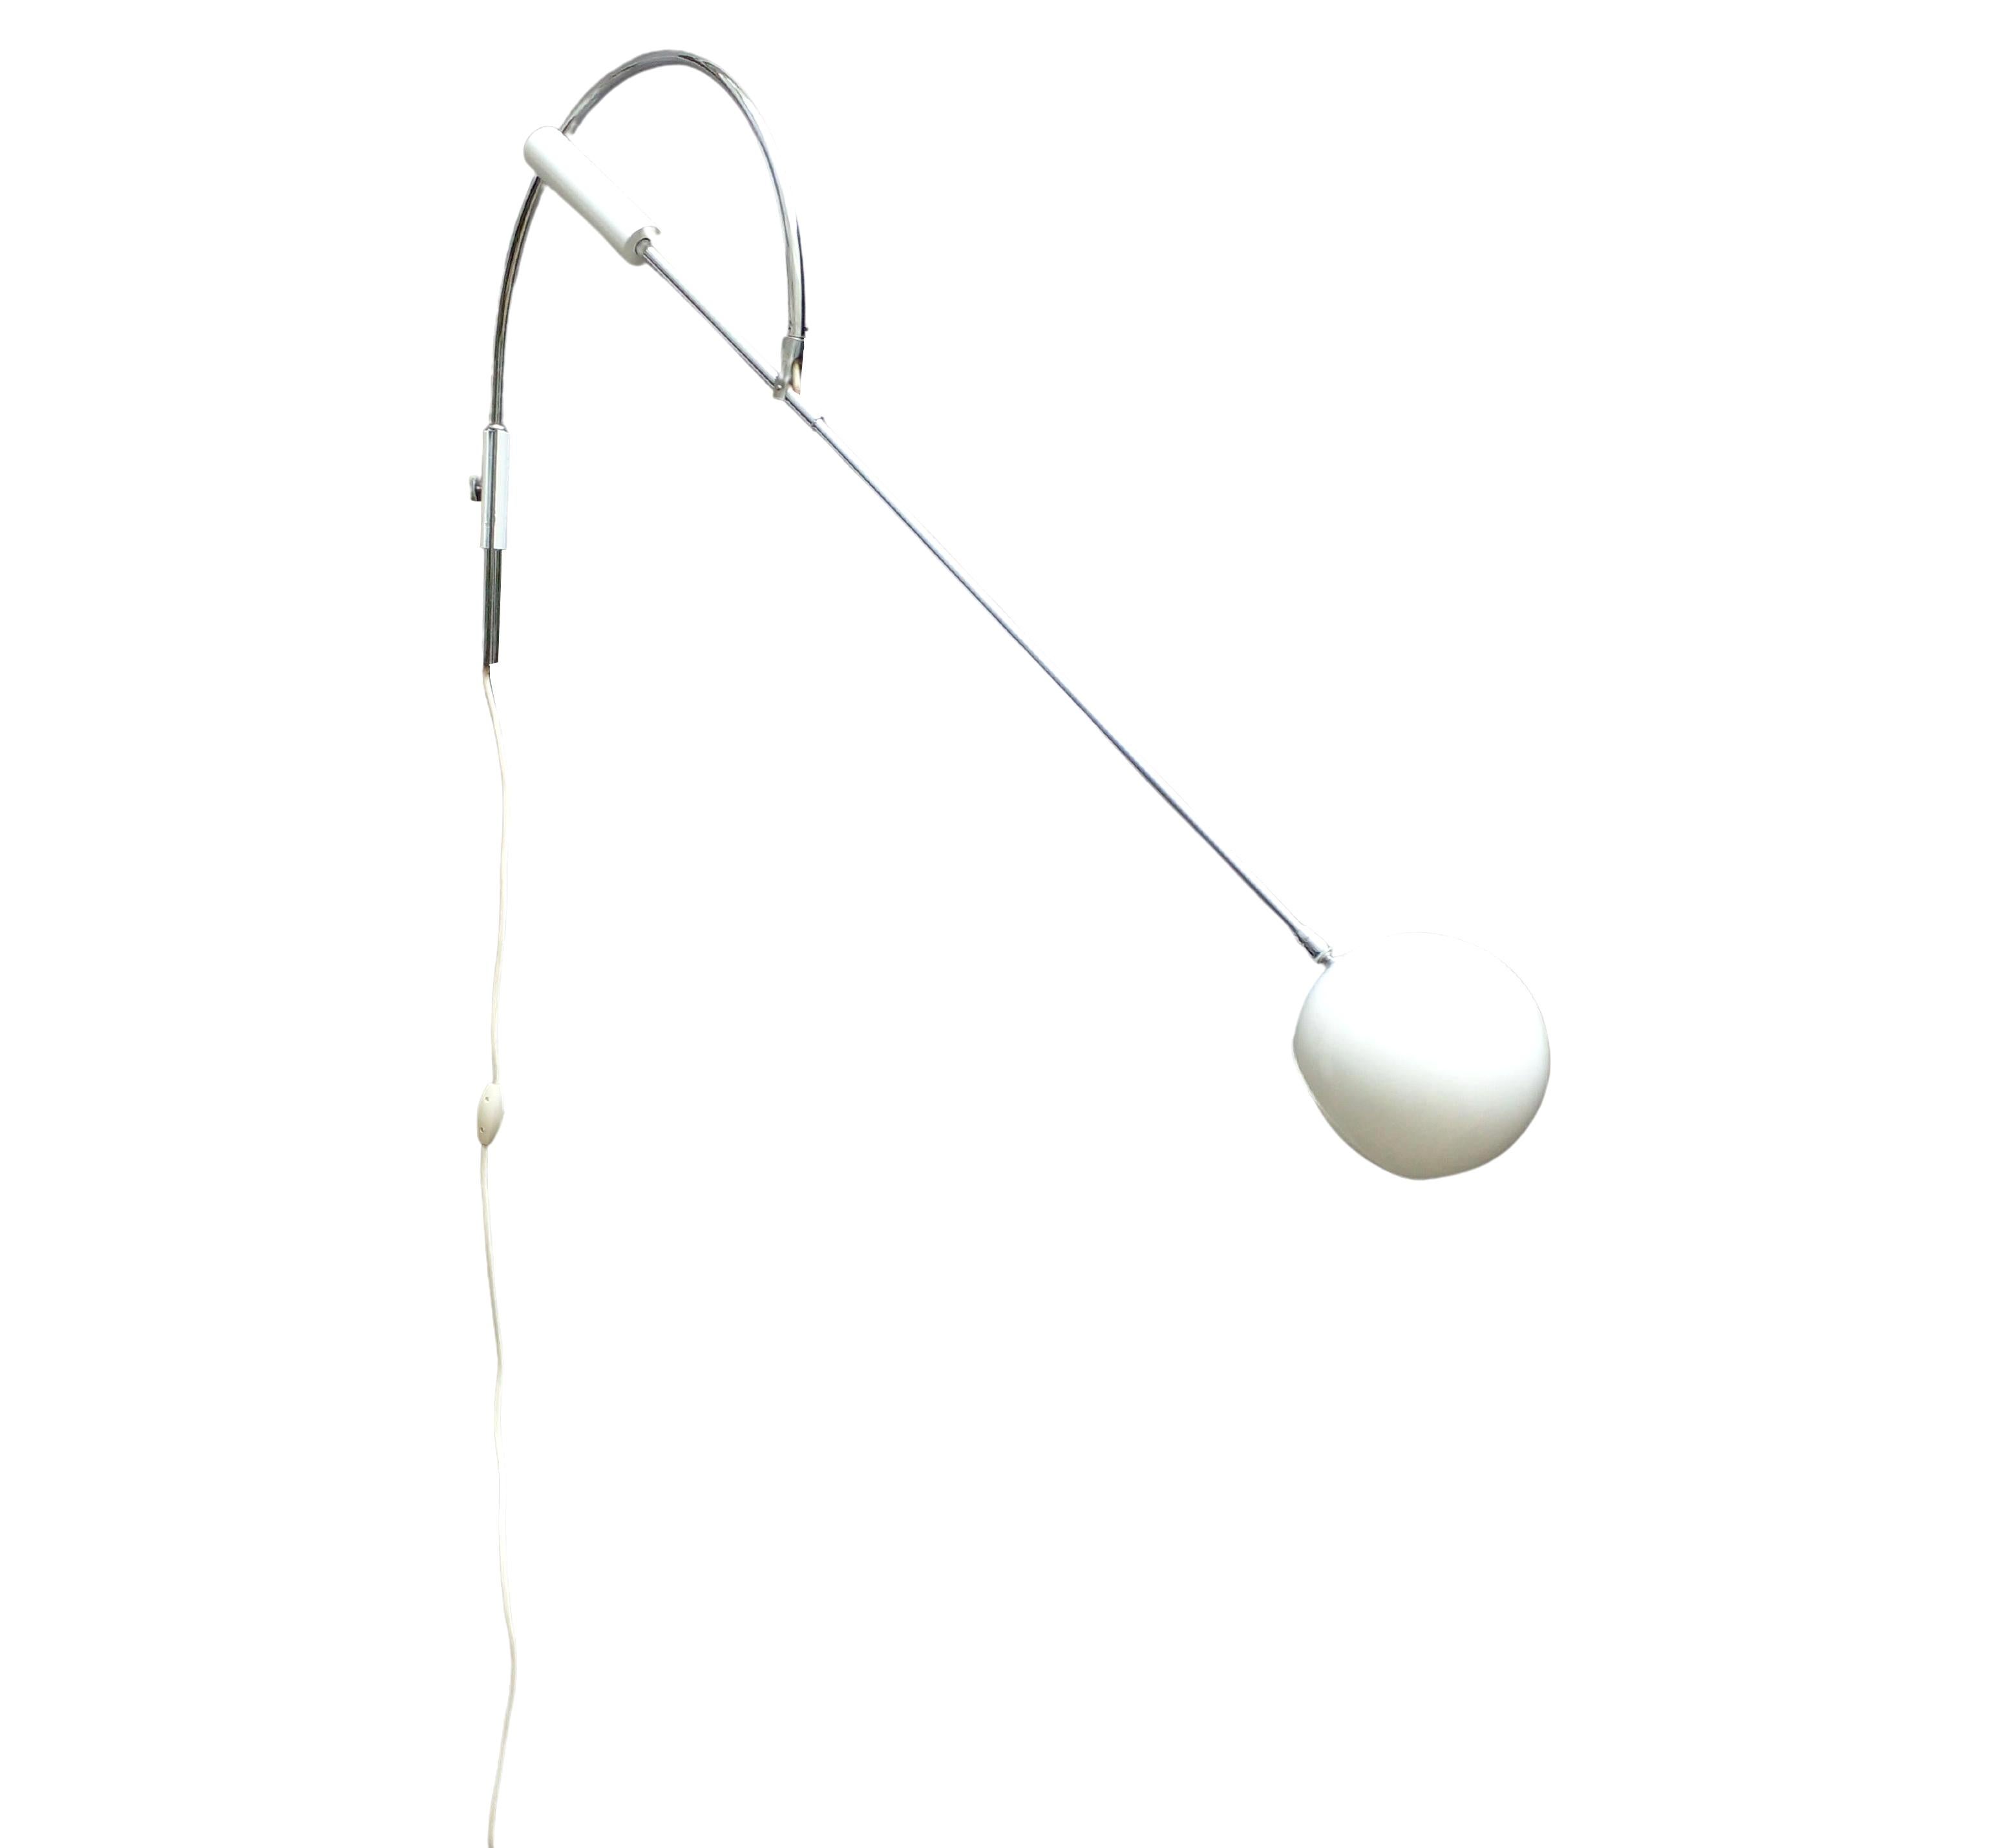 Multi-Adjustable Robert Sonneman Wall Mounted Orbitor Reading Lamp In Good Condition For Sale In Paris, FR